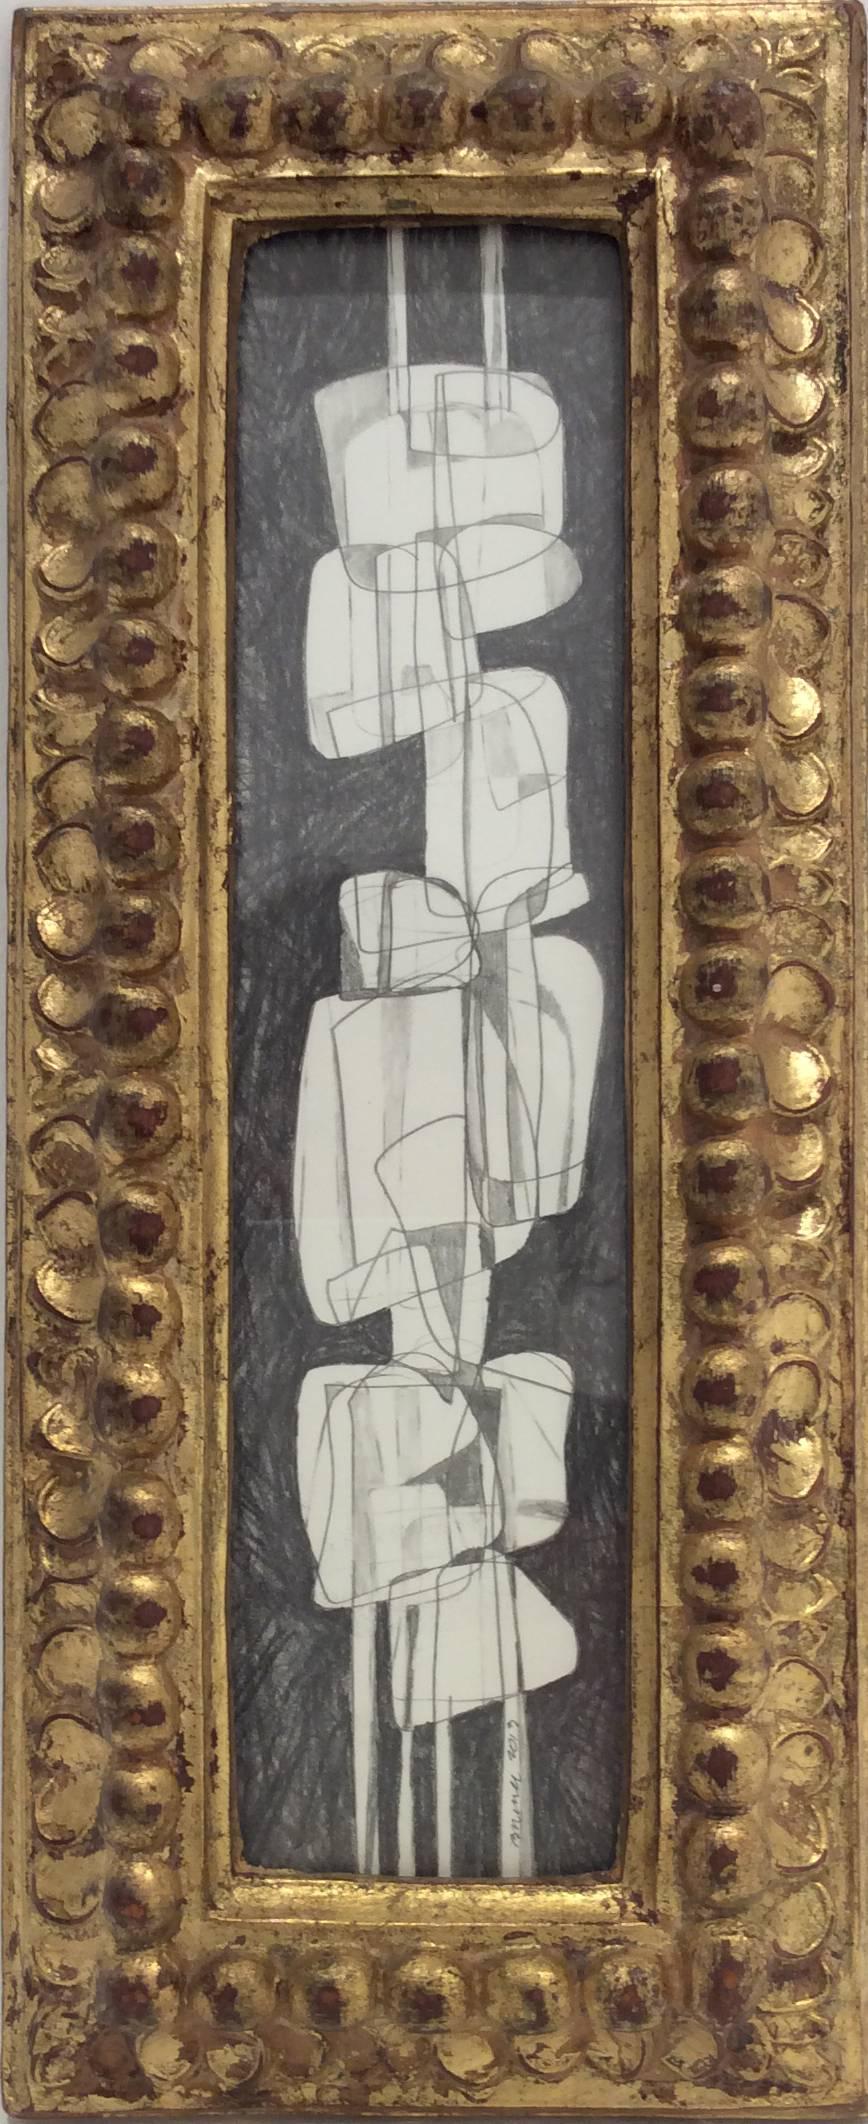 Totems (Diptych): Futurist Style Graphite Drawings in Vintage Gold Buckled Frame - Contemporary Art by David Dew Bruner